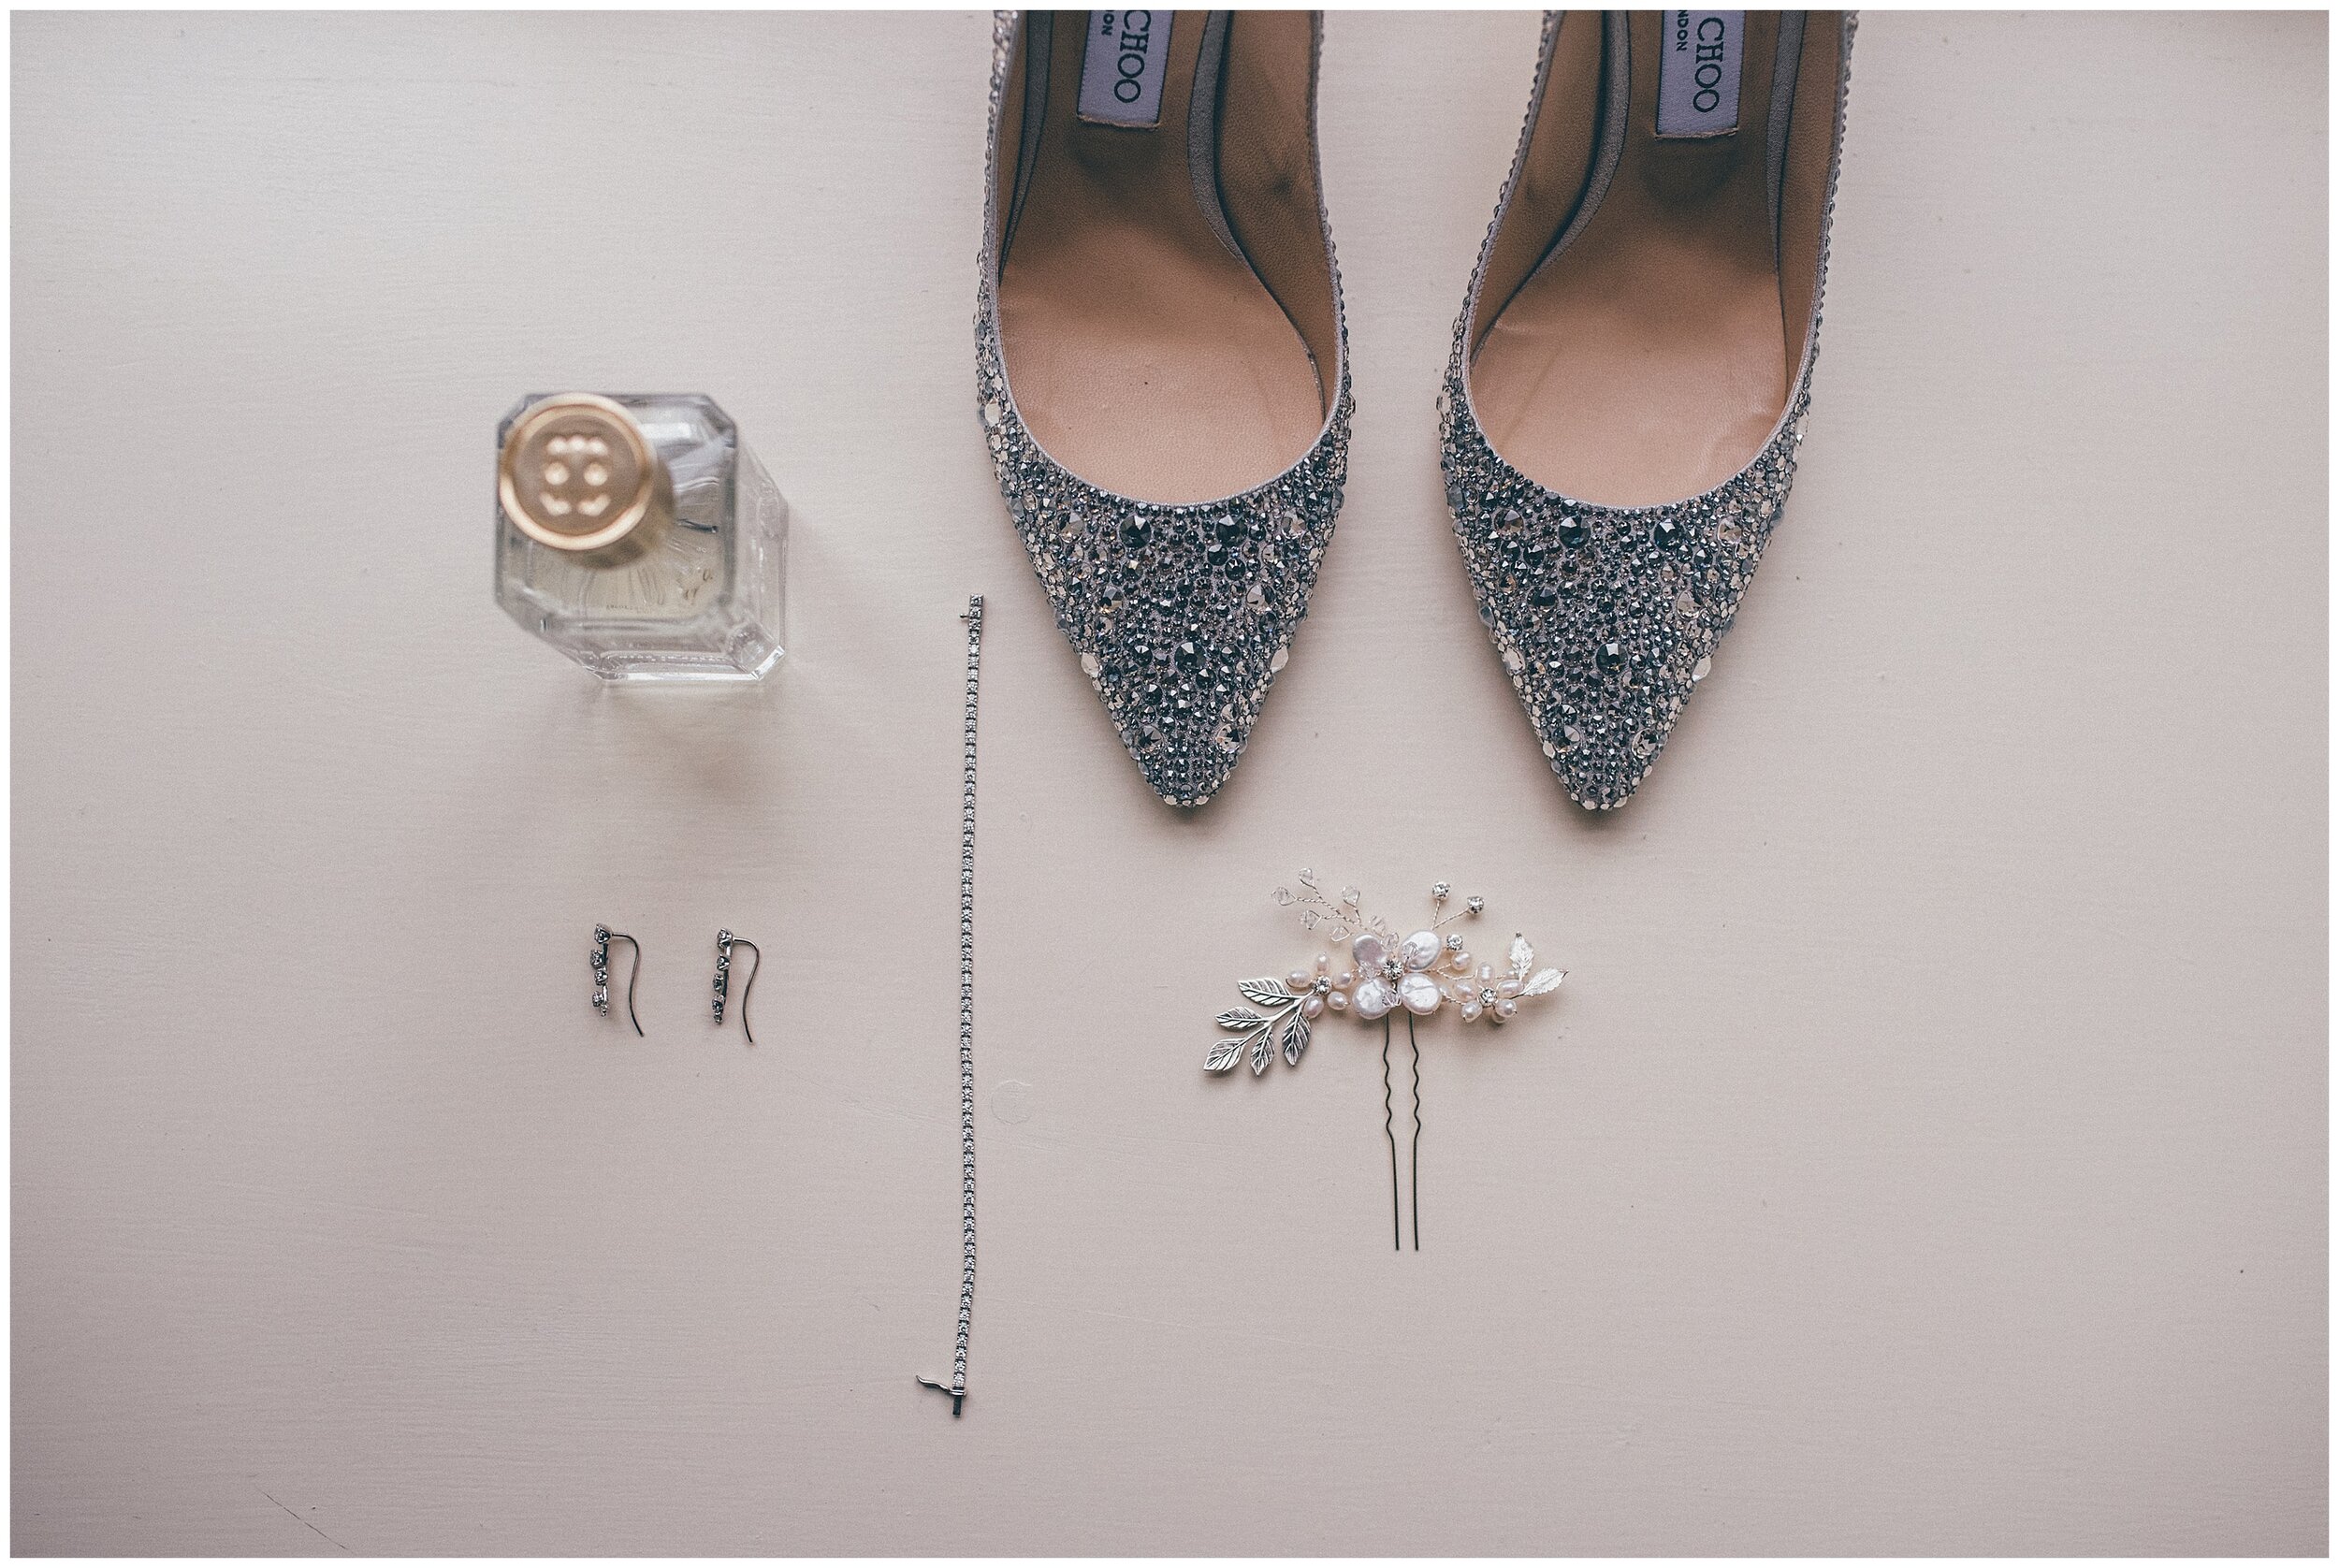 Bride's items on her wedding morning at Silverholme Manor, Graythwaite Estate in the Lake District.